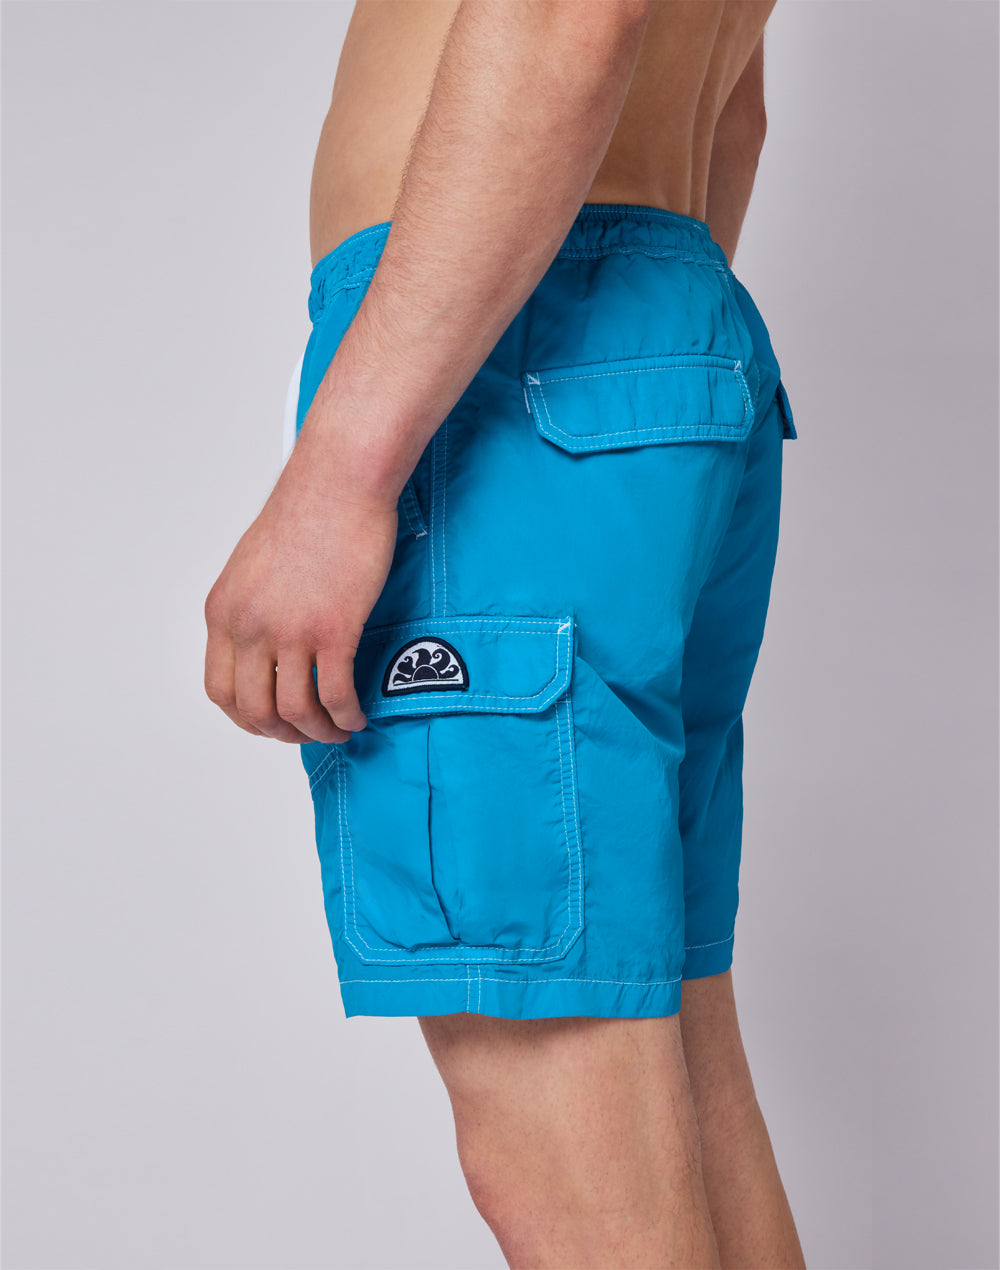 SHORTS CARGO IN TESSUTO QUICK DRY